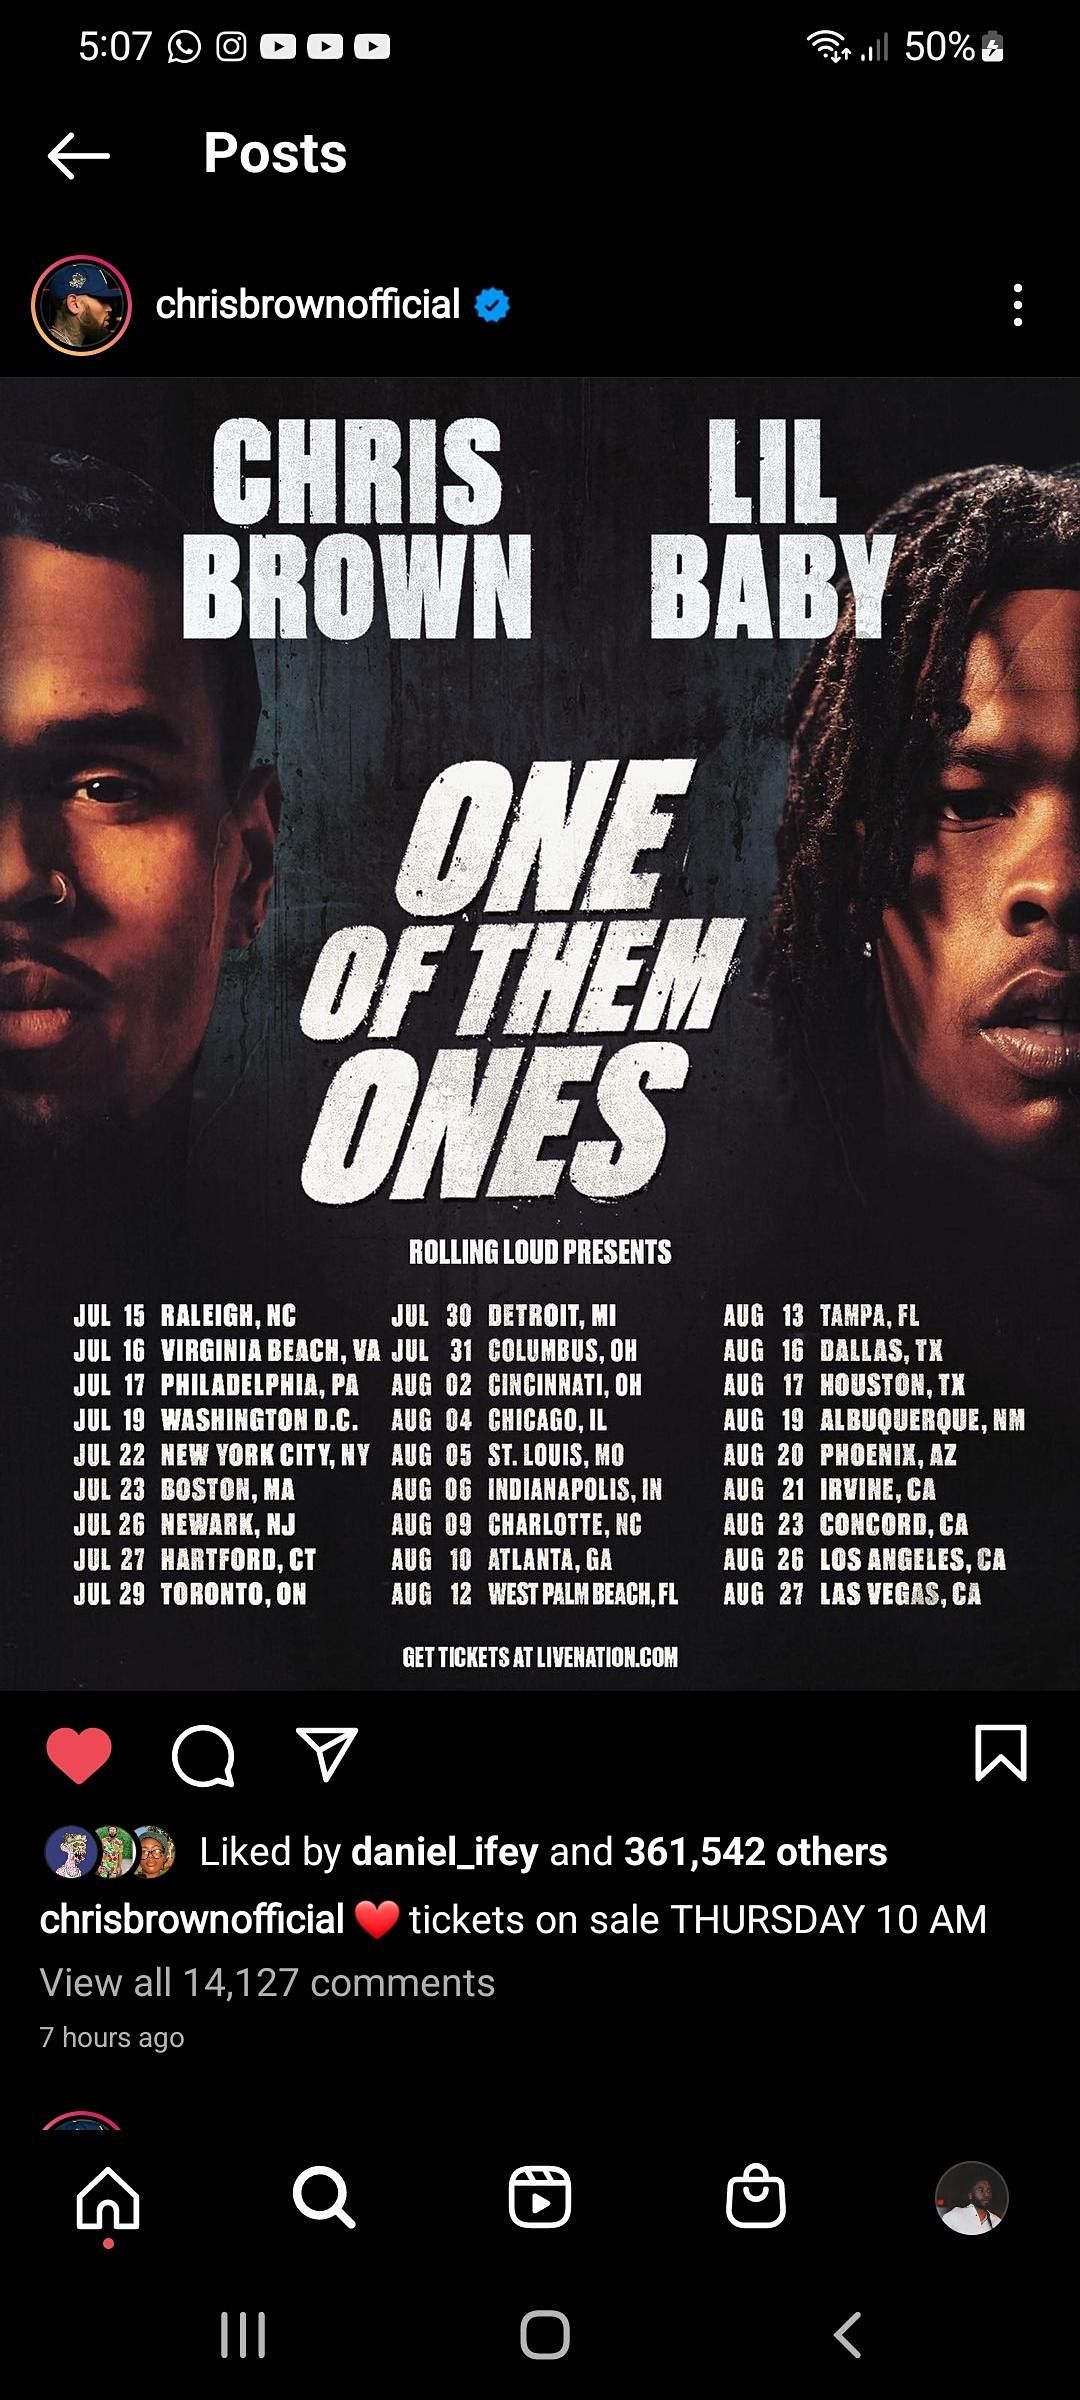 Chris Brown X lil Baby one of those ones tour New York, Madison Square